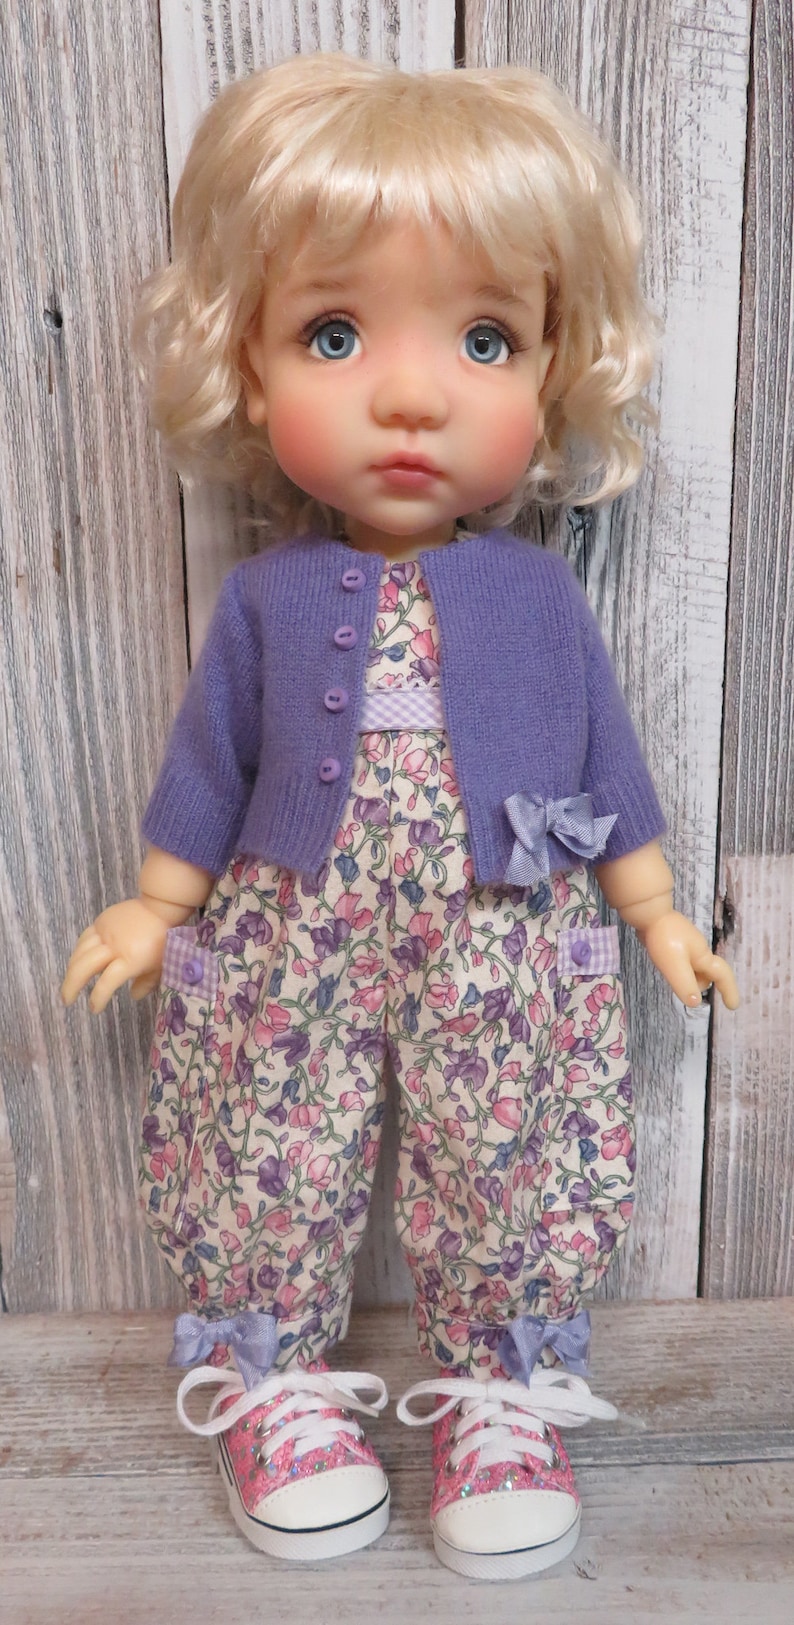 Pattern Meadowdolls Moppet 2 Sleeveless Dress, Sweater with Sleeve Options, Ruffled Bloomers, Romper for BJD 15 imagem 4